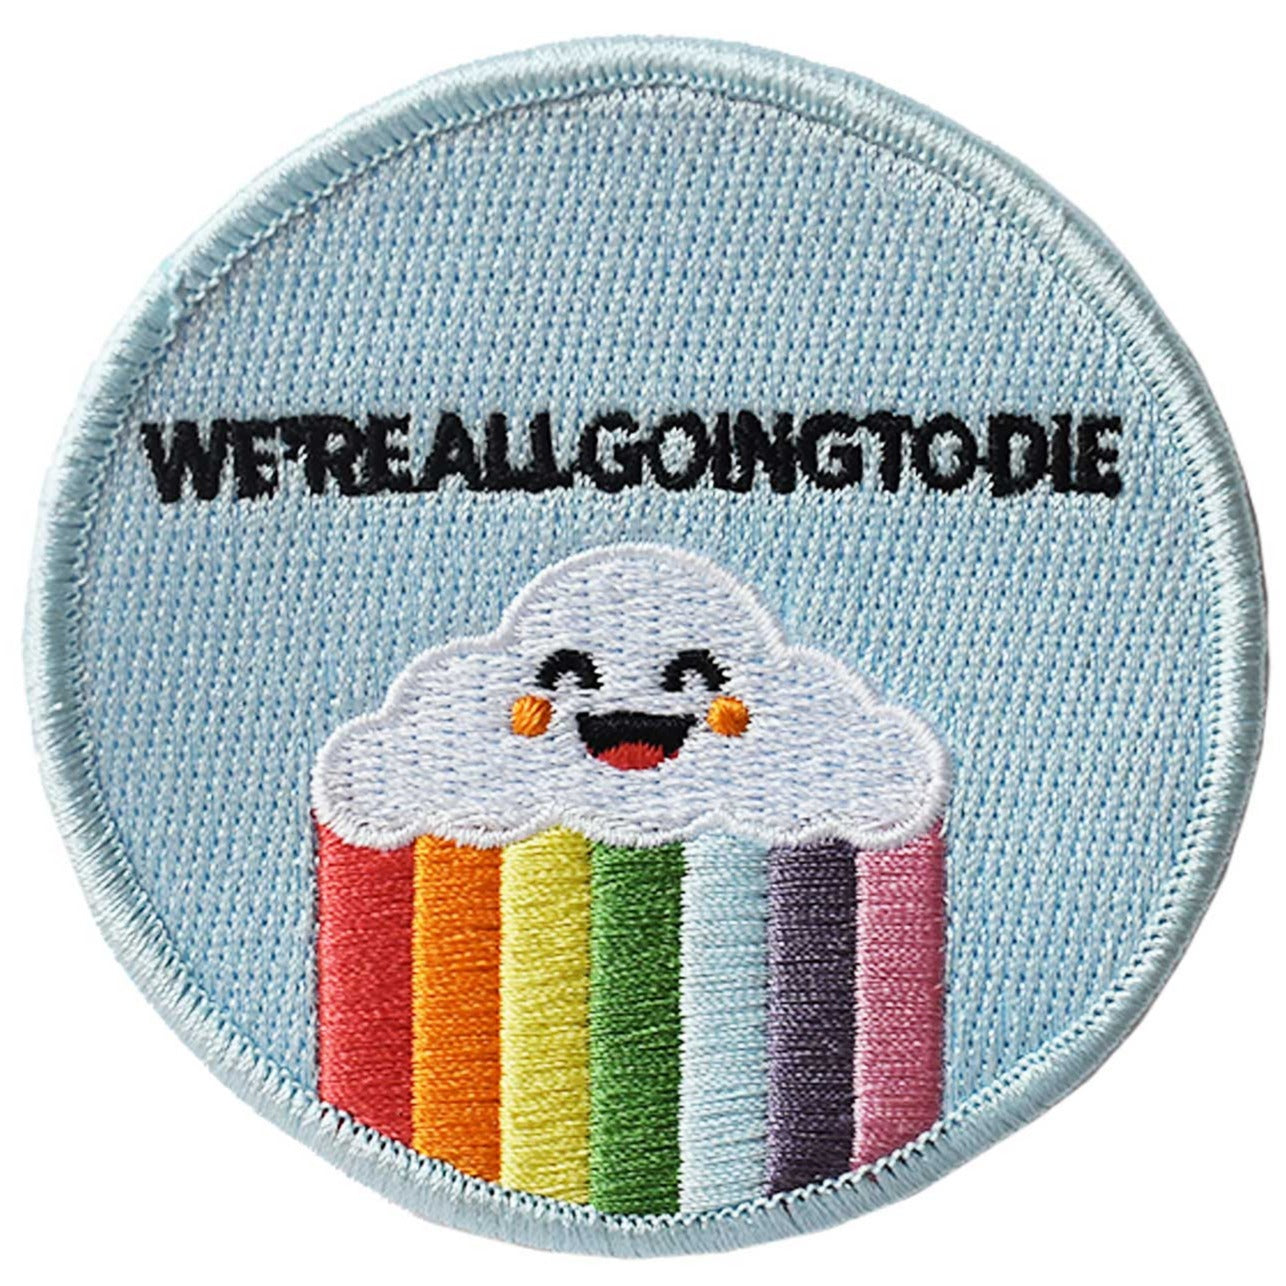 We're All Going to Die Embroidered Patch - Retrograde Supply Co